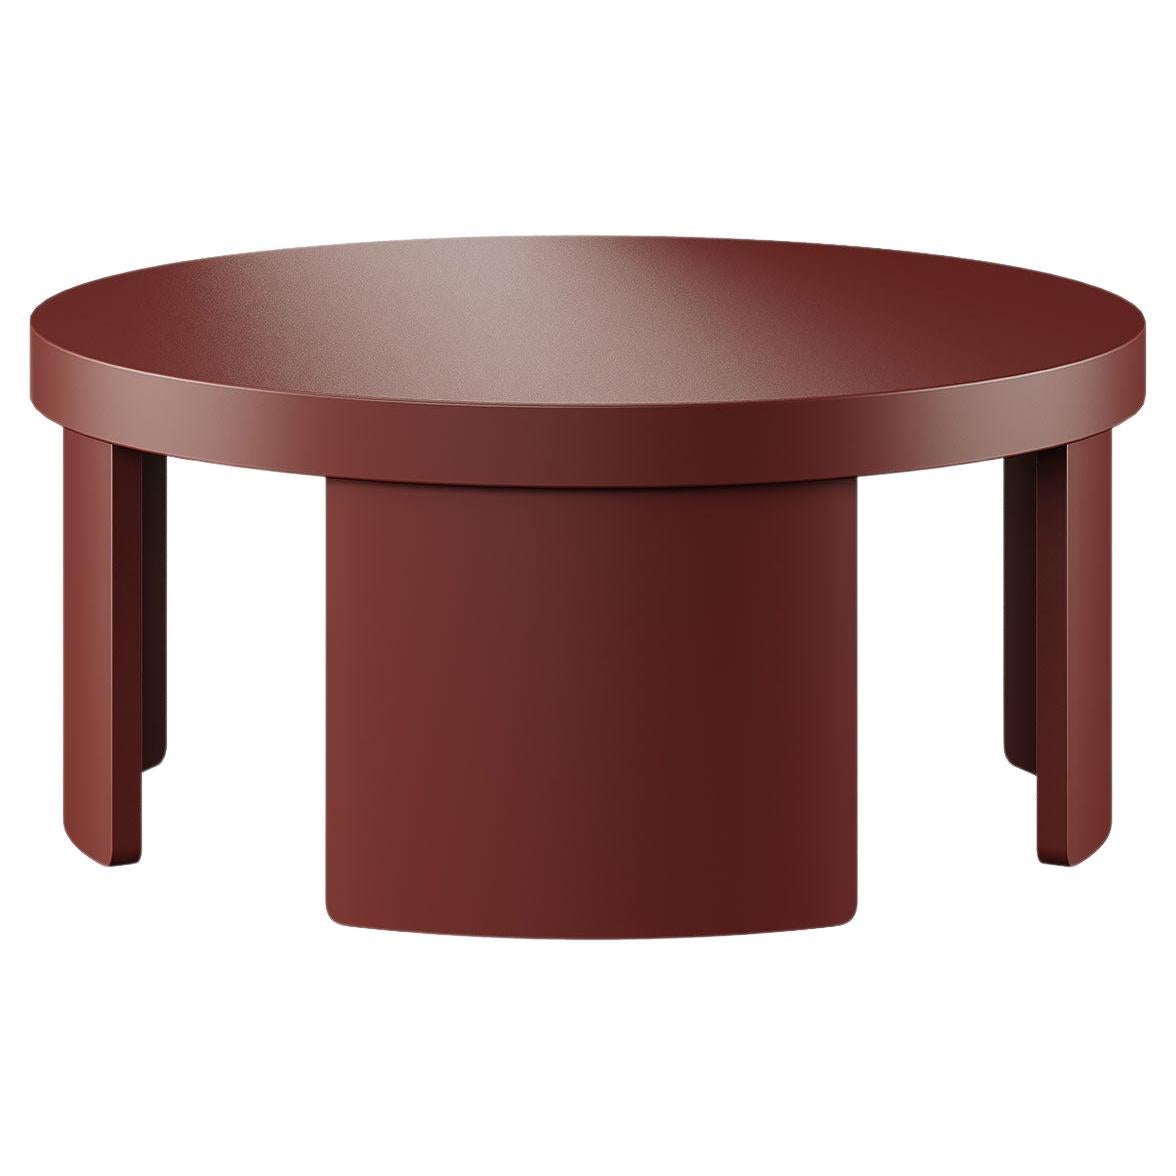 Mid-century Modern Round Coffee Table Dark Red Brown Matte Lacquer For Sale